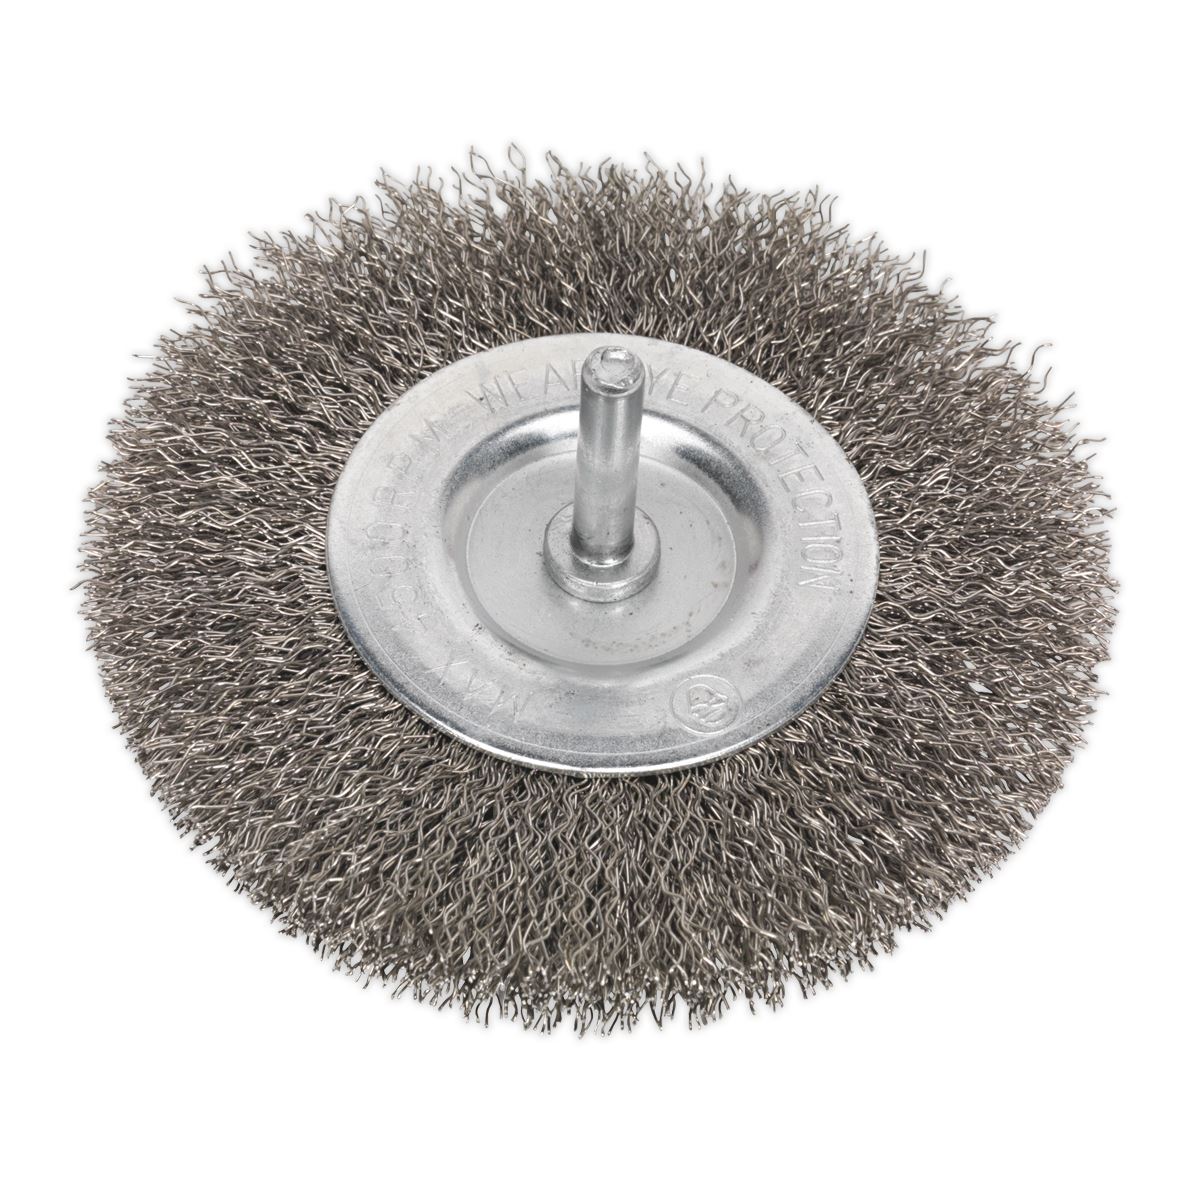 Sealey Crimped Flat Wire Brush Stainless Steel Ø100mm Ø6mm Shaft